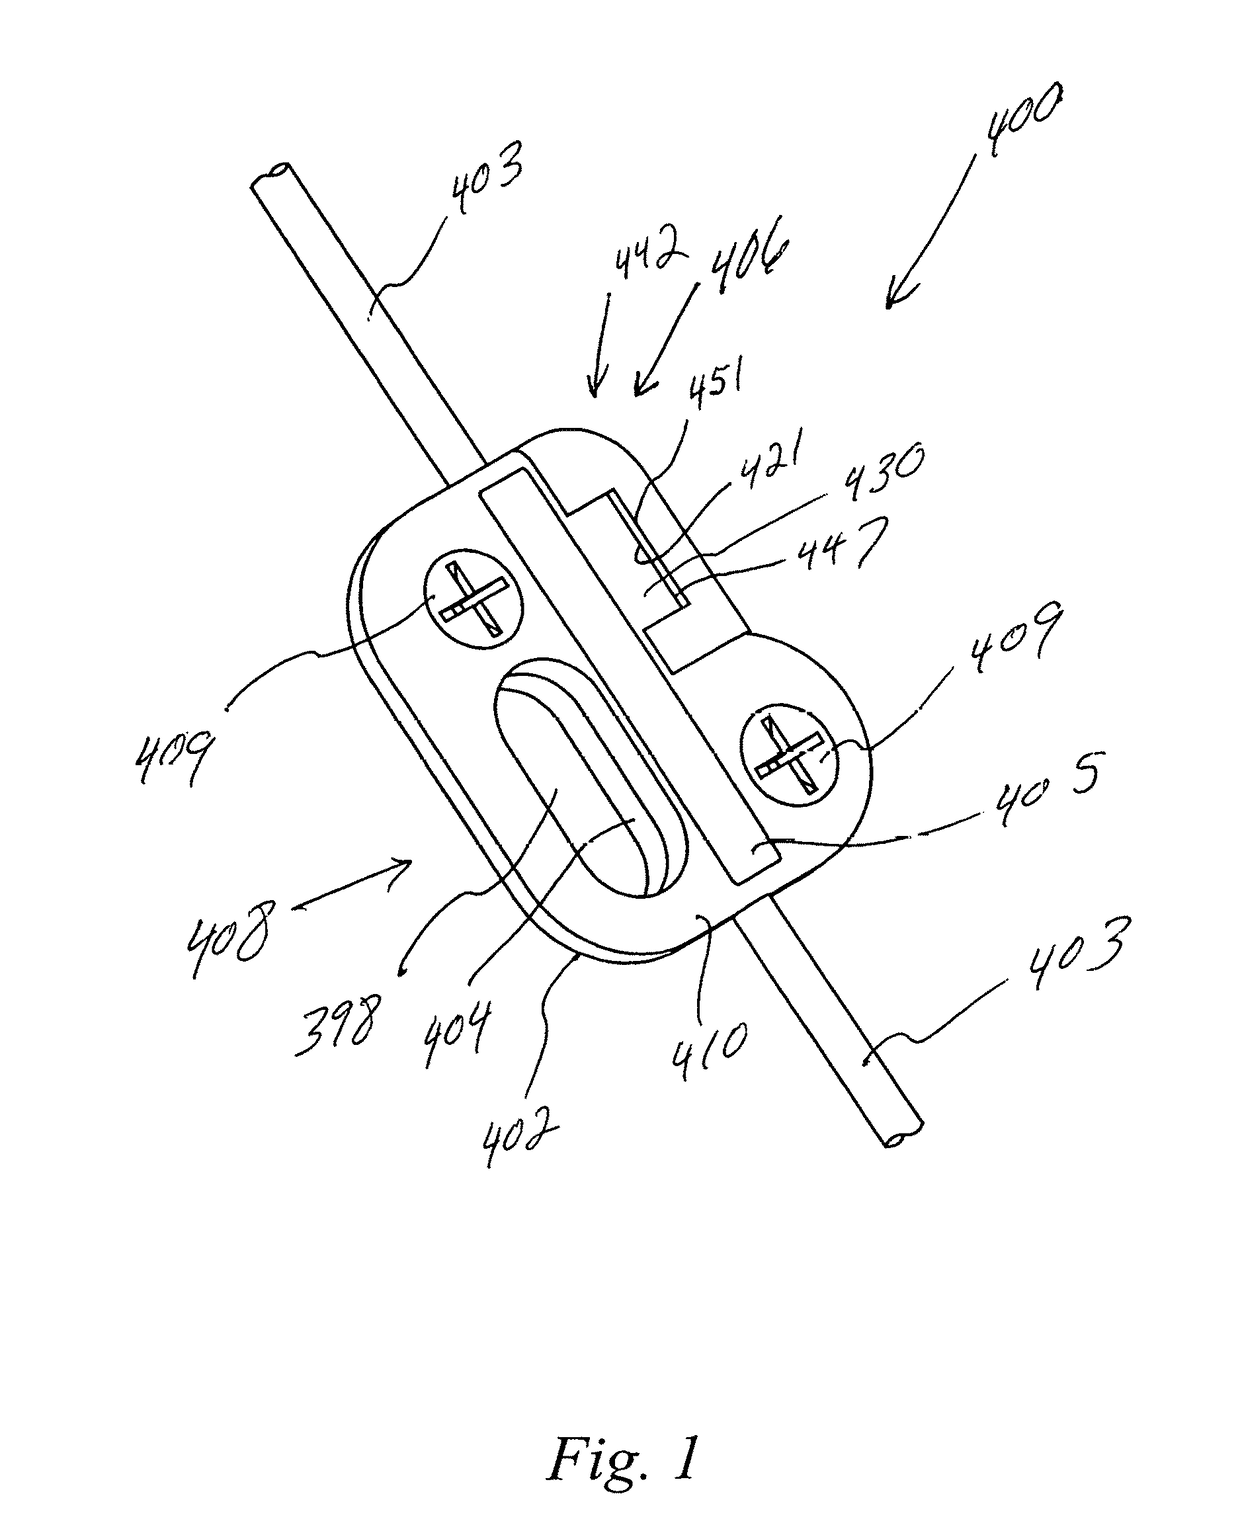 Hinged archery sight for a bow for shooting arrows